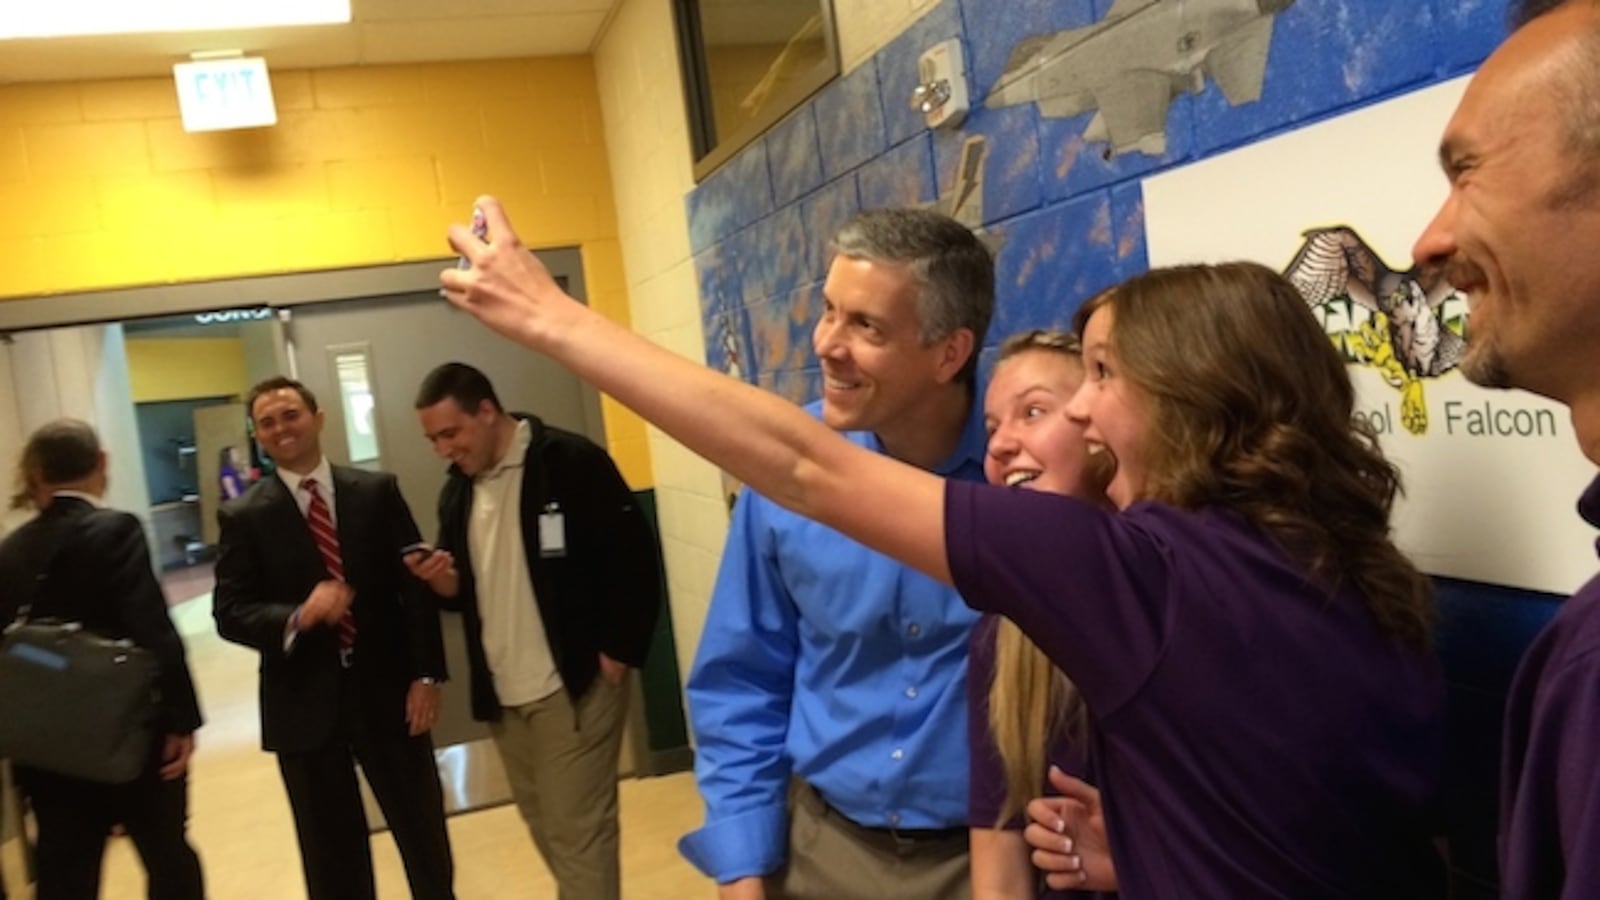 U.S. Secretary of Education Arne Duncan takes a selfie with students from Falcon High School. The students participated in a panel with Duncan on the unique needs of students with family in the military.